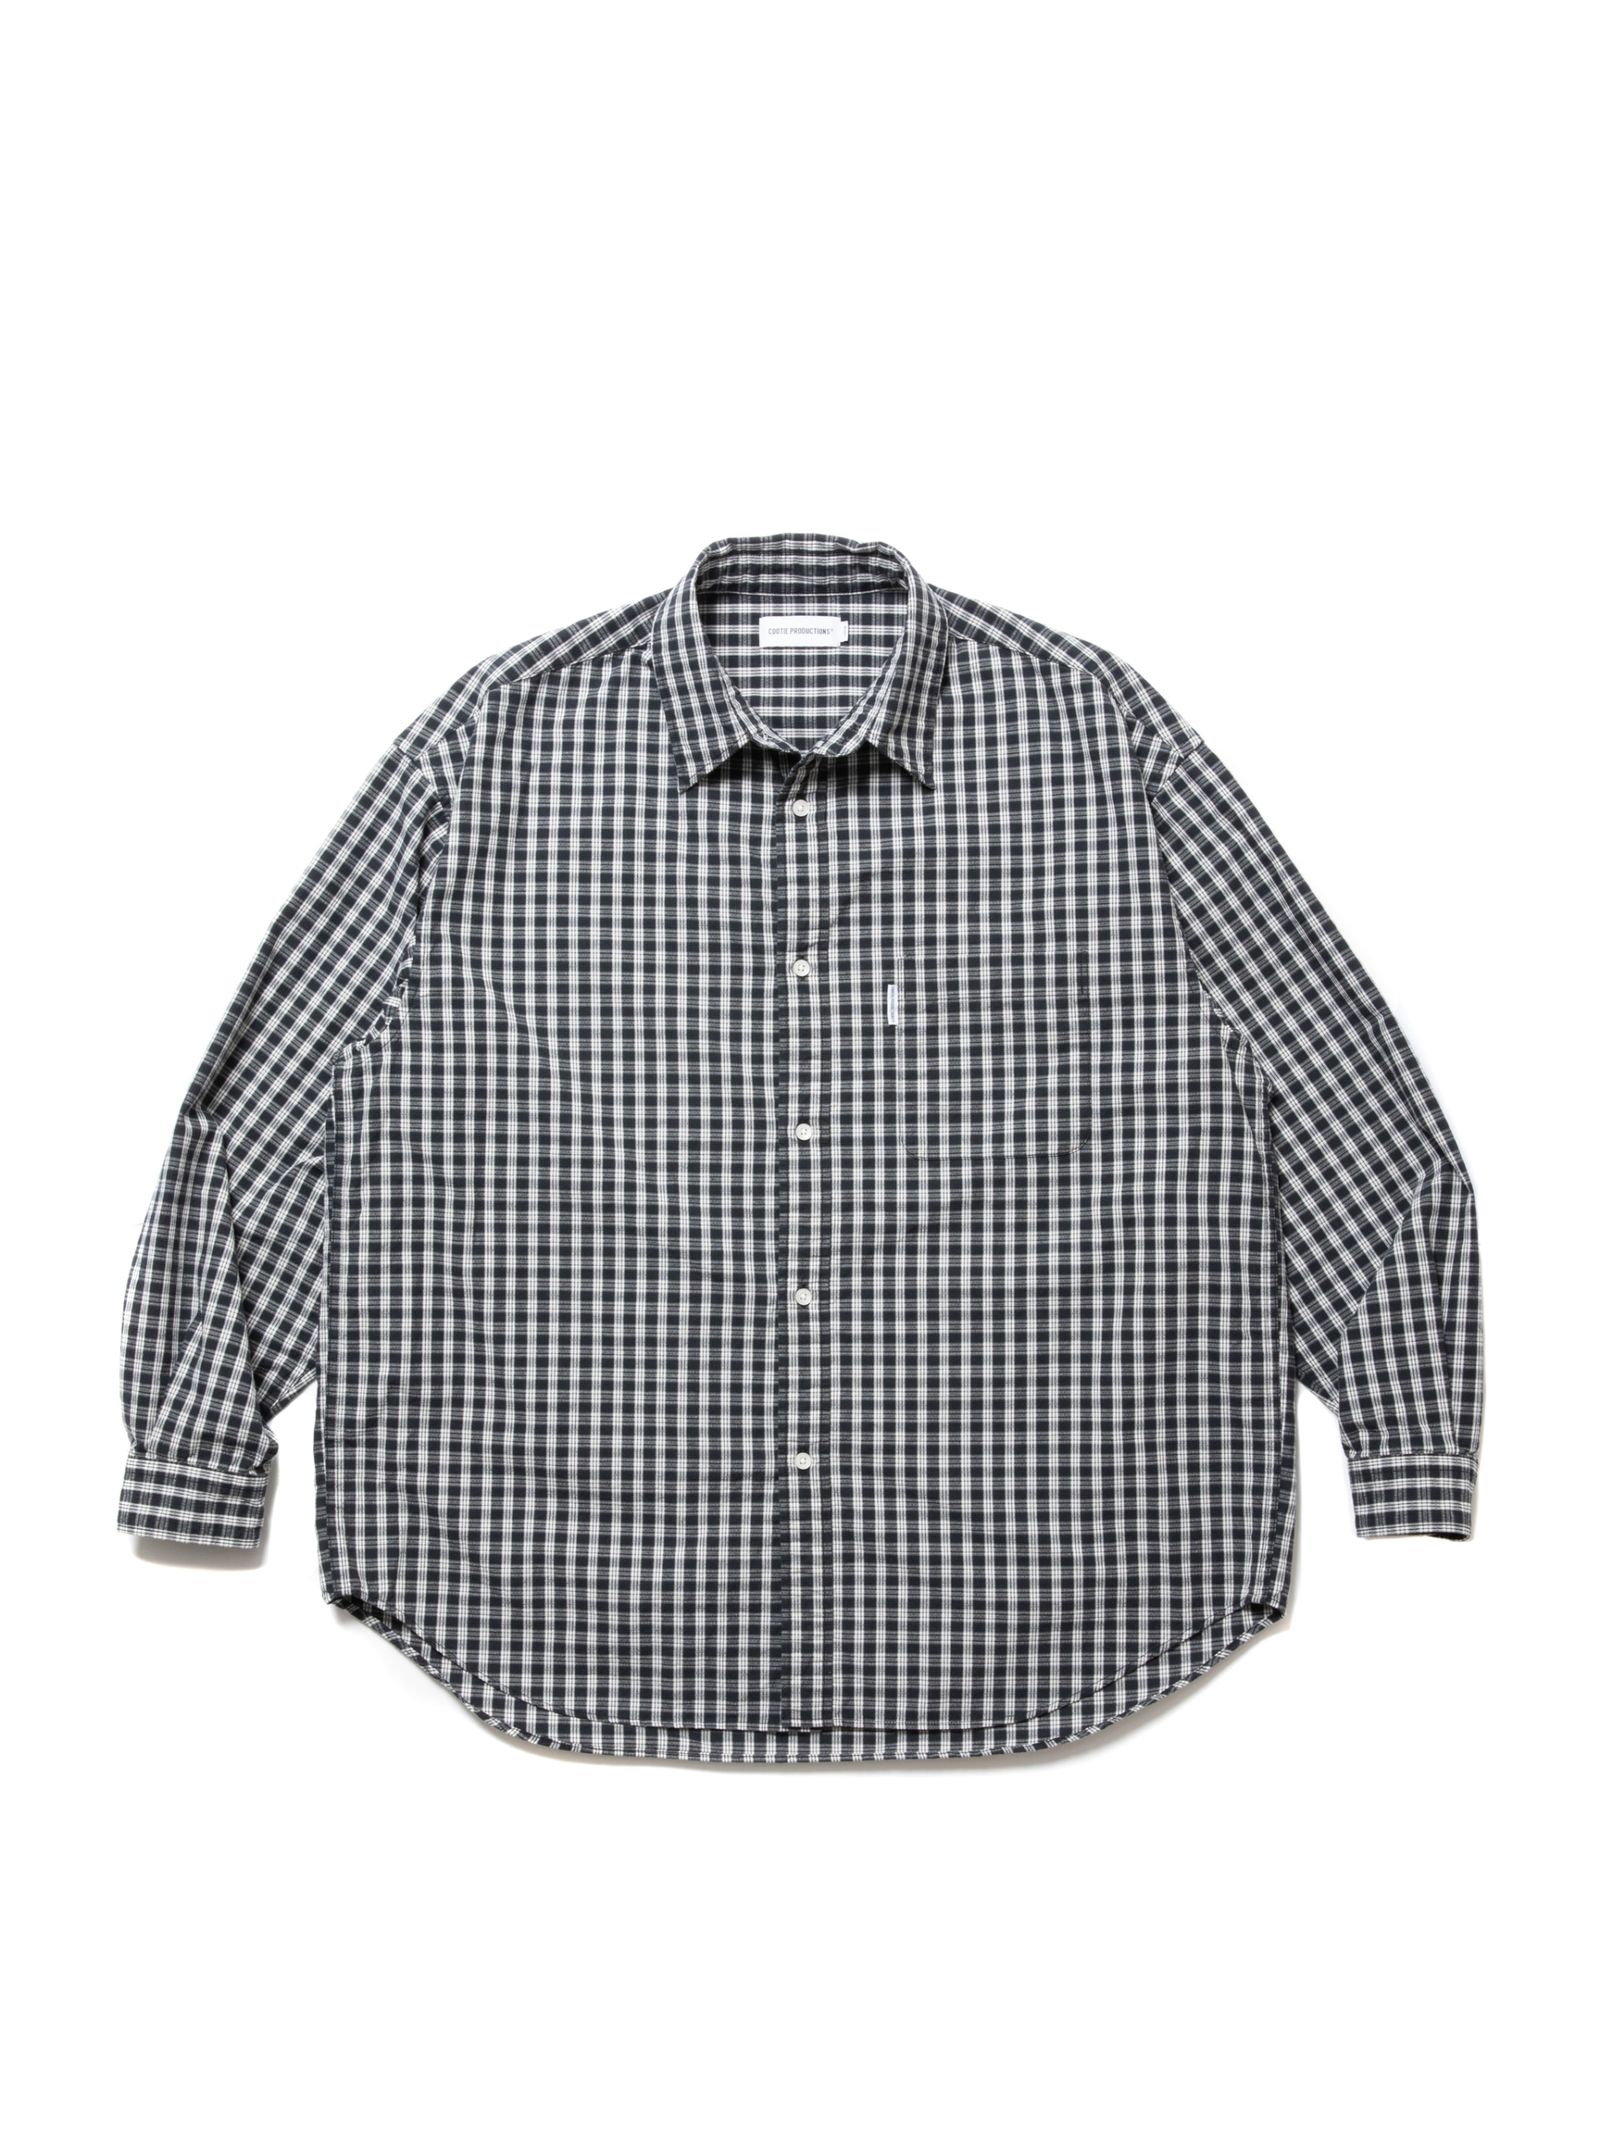 COOTIE PRODUCTIONS - Dobby Check L/S Shirt (BLACK) / ドビー 